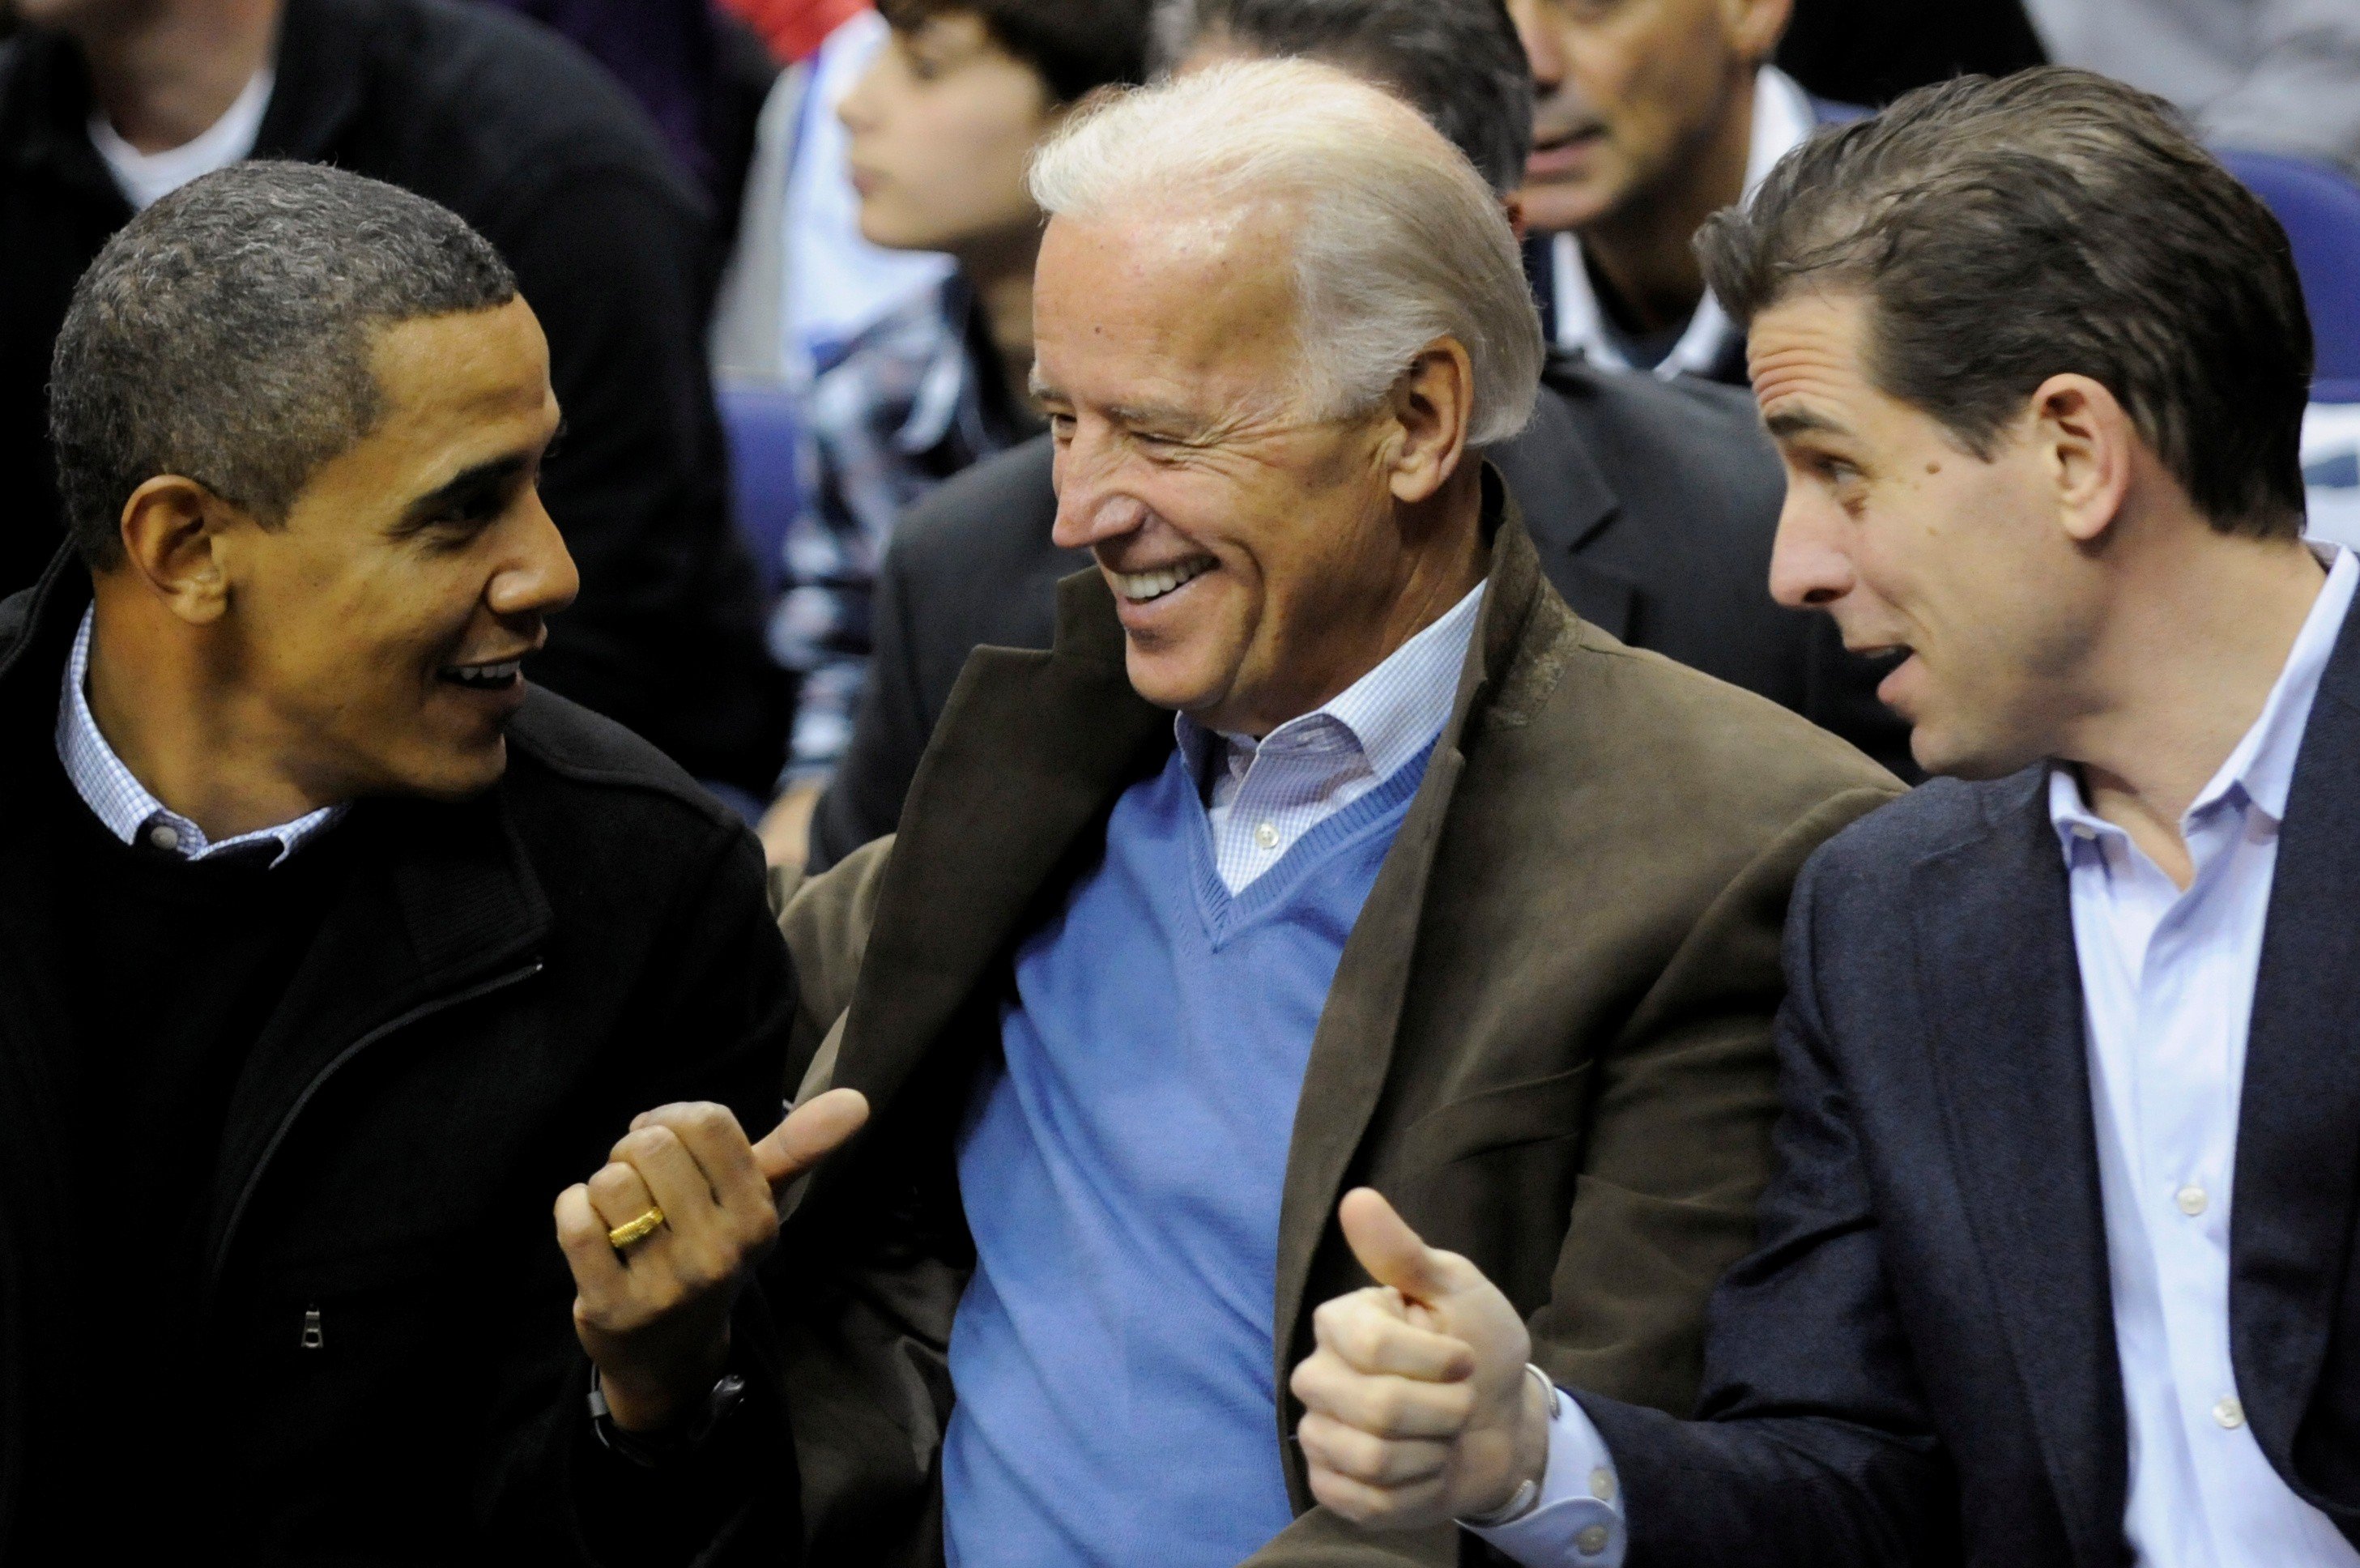 Barack Obama, the former US president, with then-vice-president Joe Biden and his son Hunter at a basketball game between Georgetown University and Duke University in Washington in 2010. Photo: Reuters